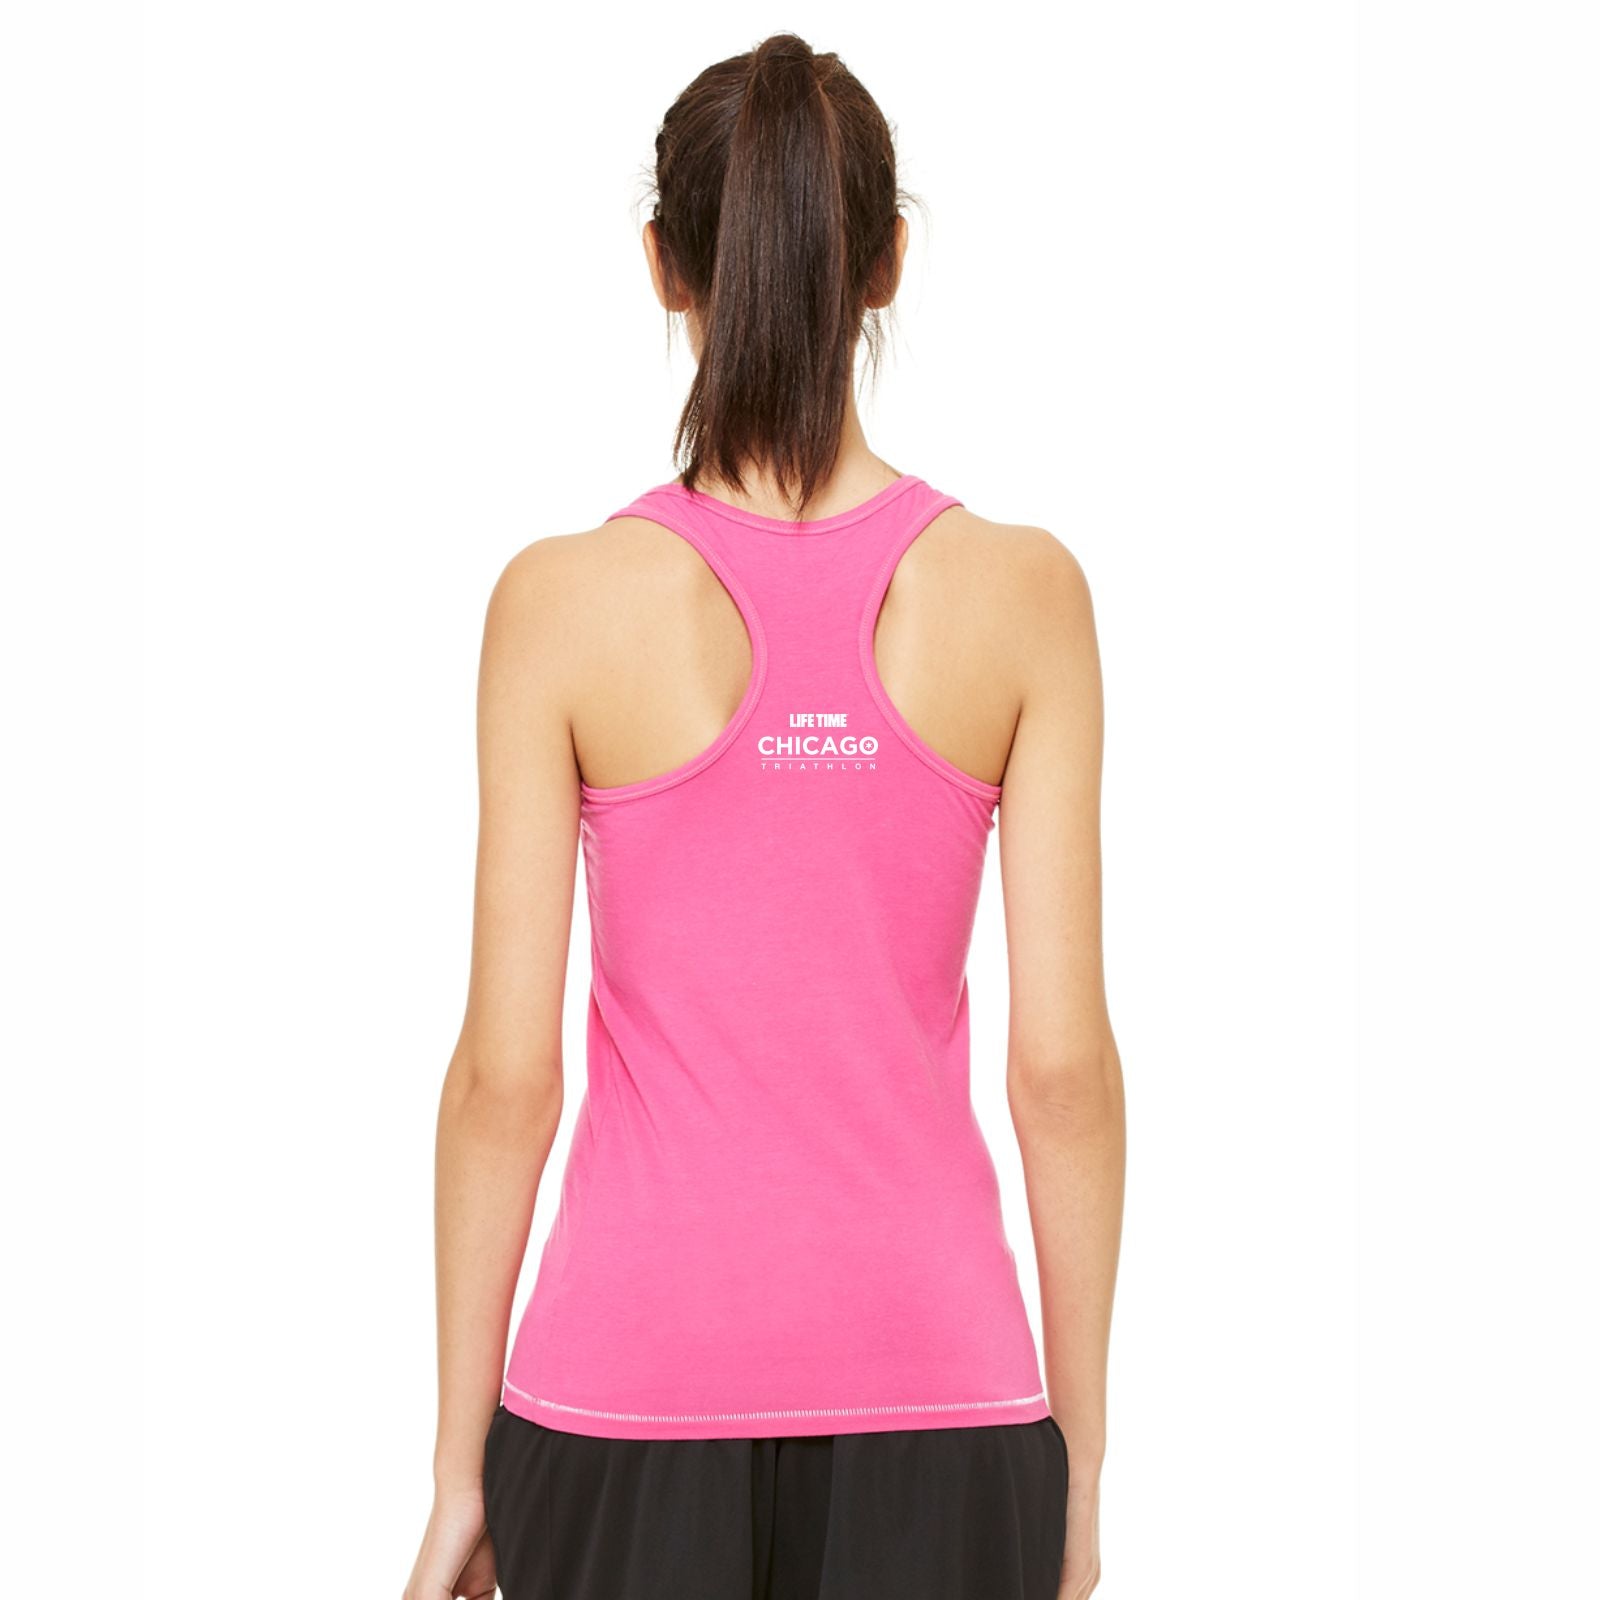 CHI TRI Women's Bamboo Racerback Singlet - Berry - Arch